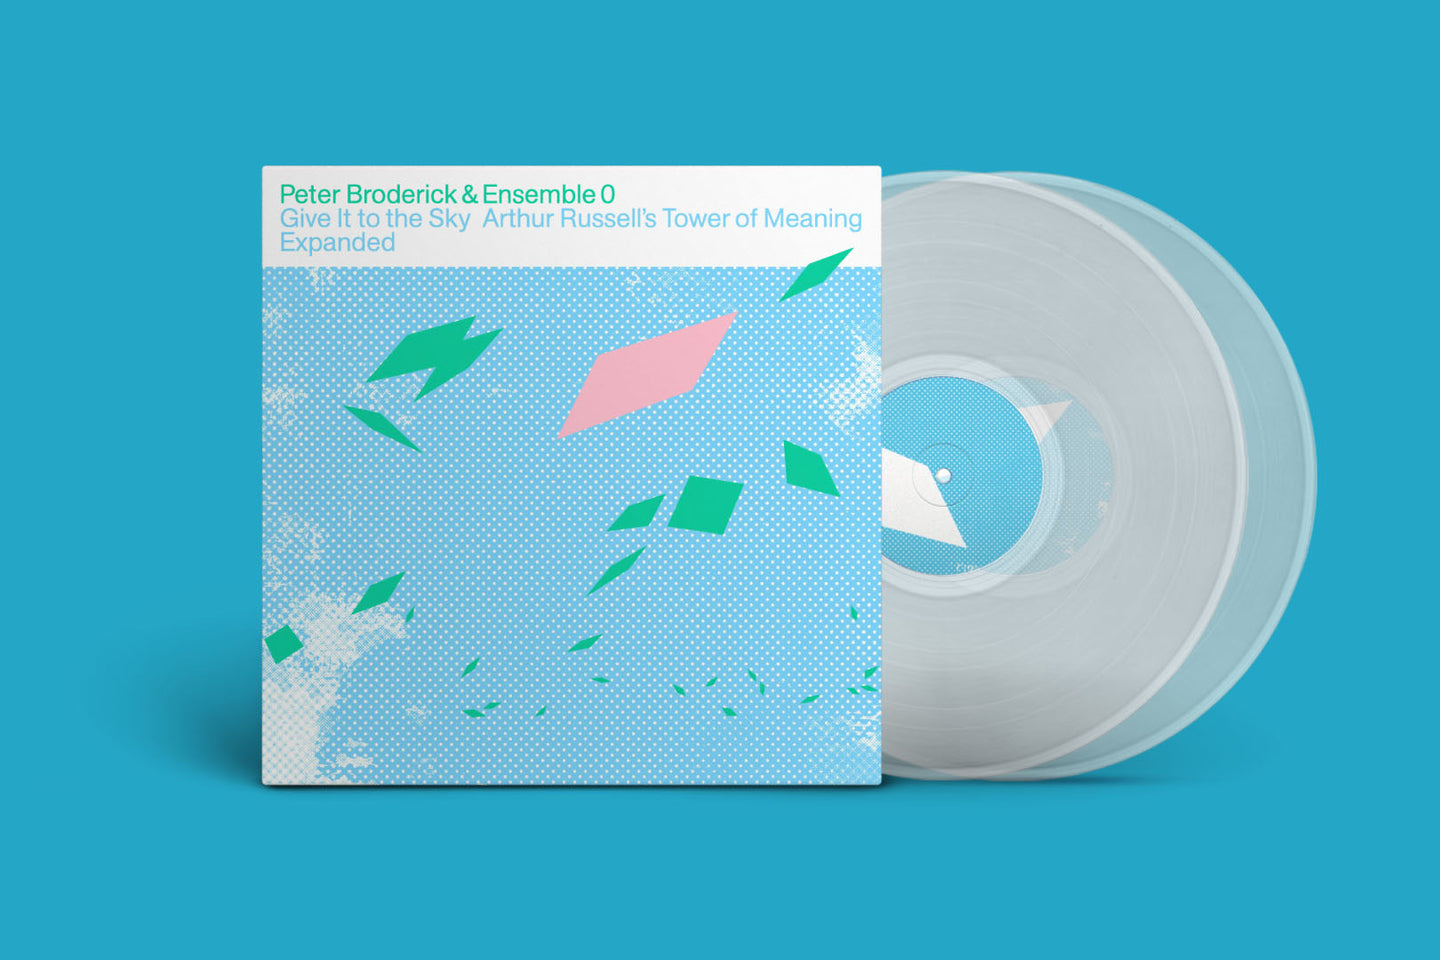 Arcade Sound - Peter Broderick & Ensemble 0 - Give It To The Sky: Arthur Russell’s Tower of Meaning Expanded front cover